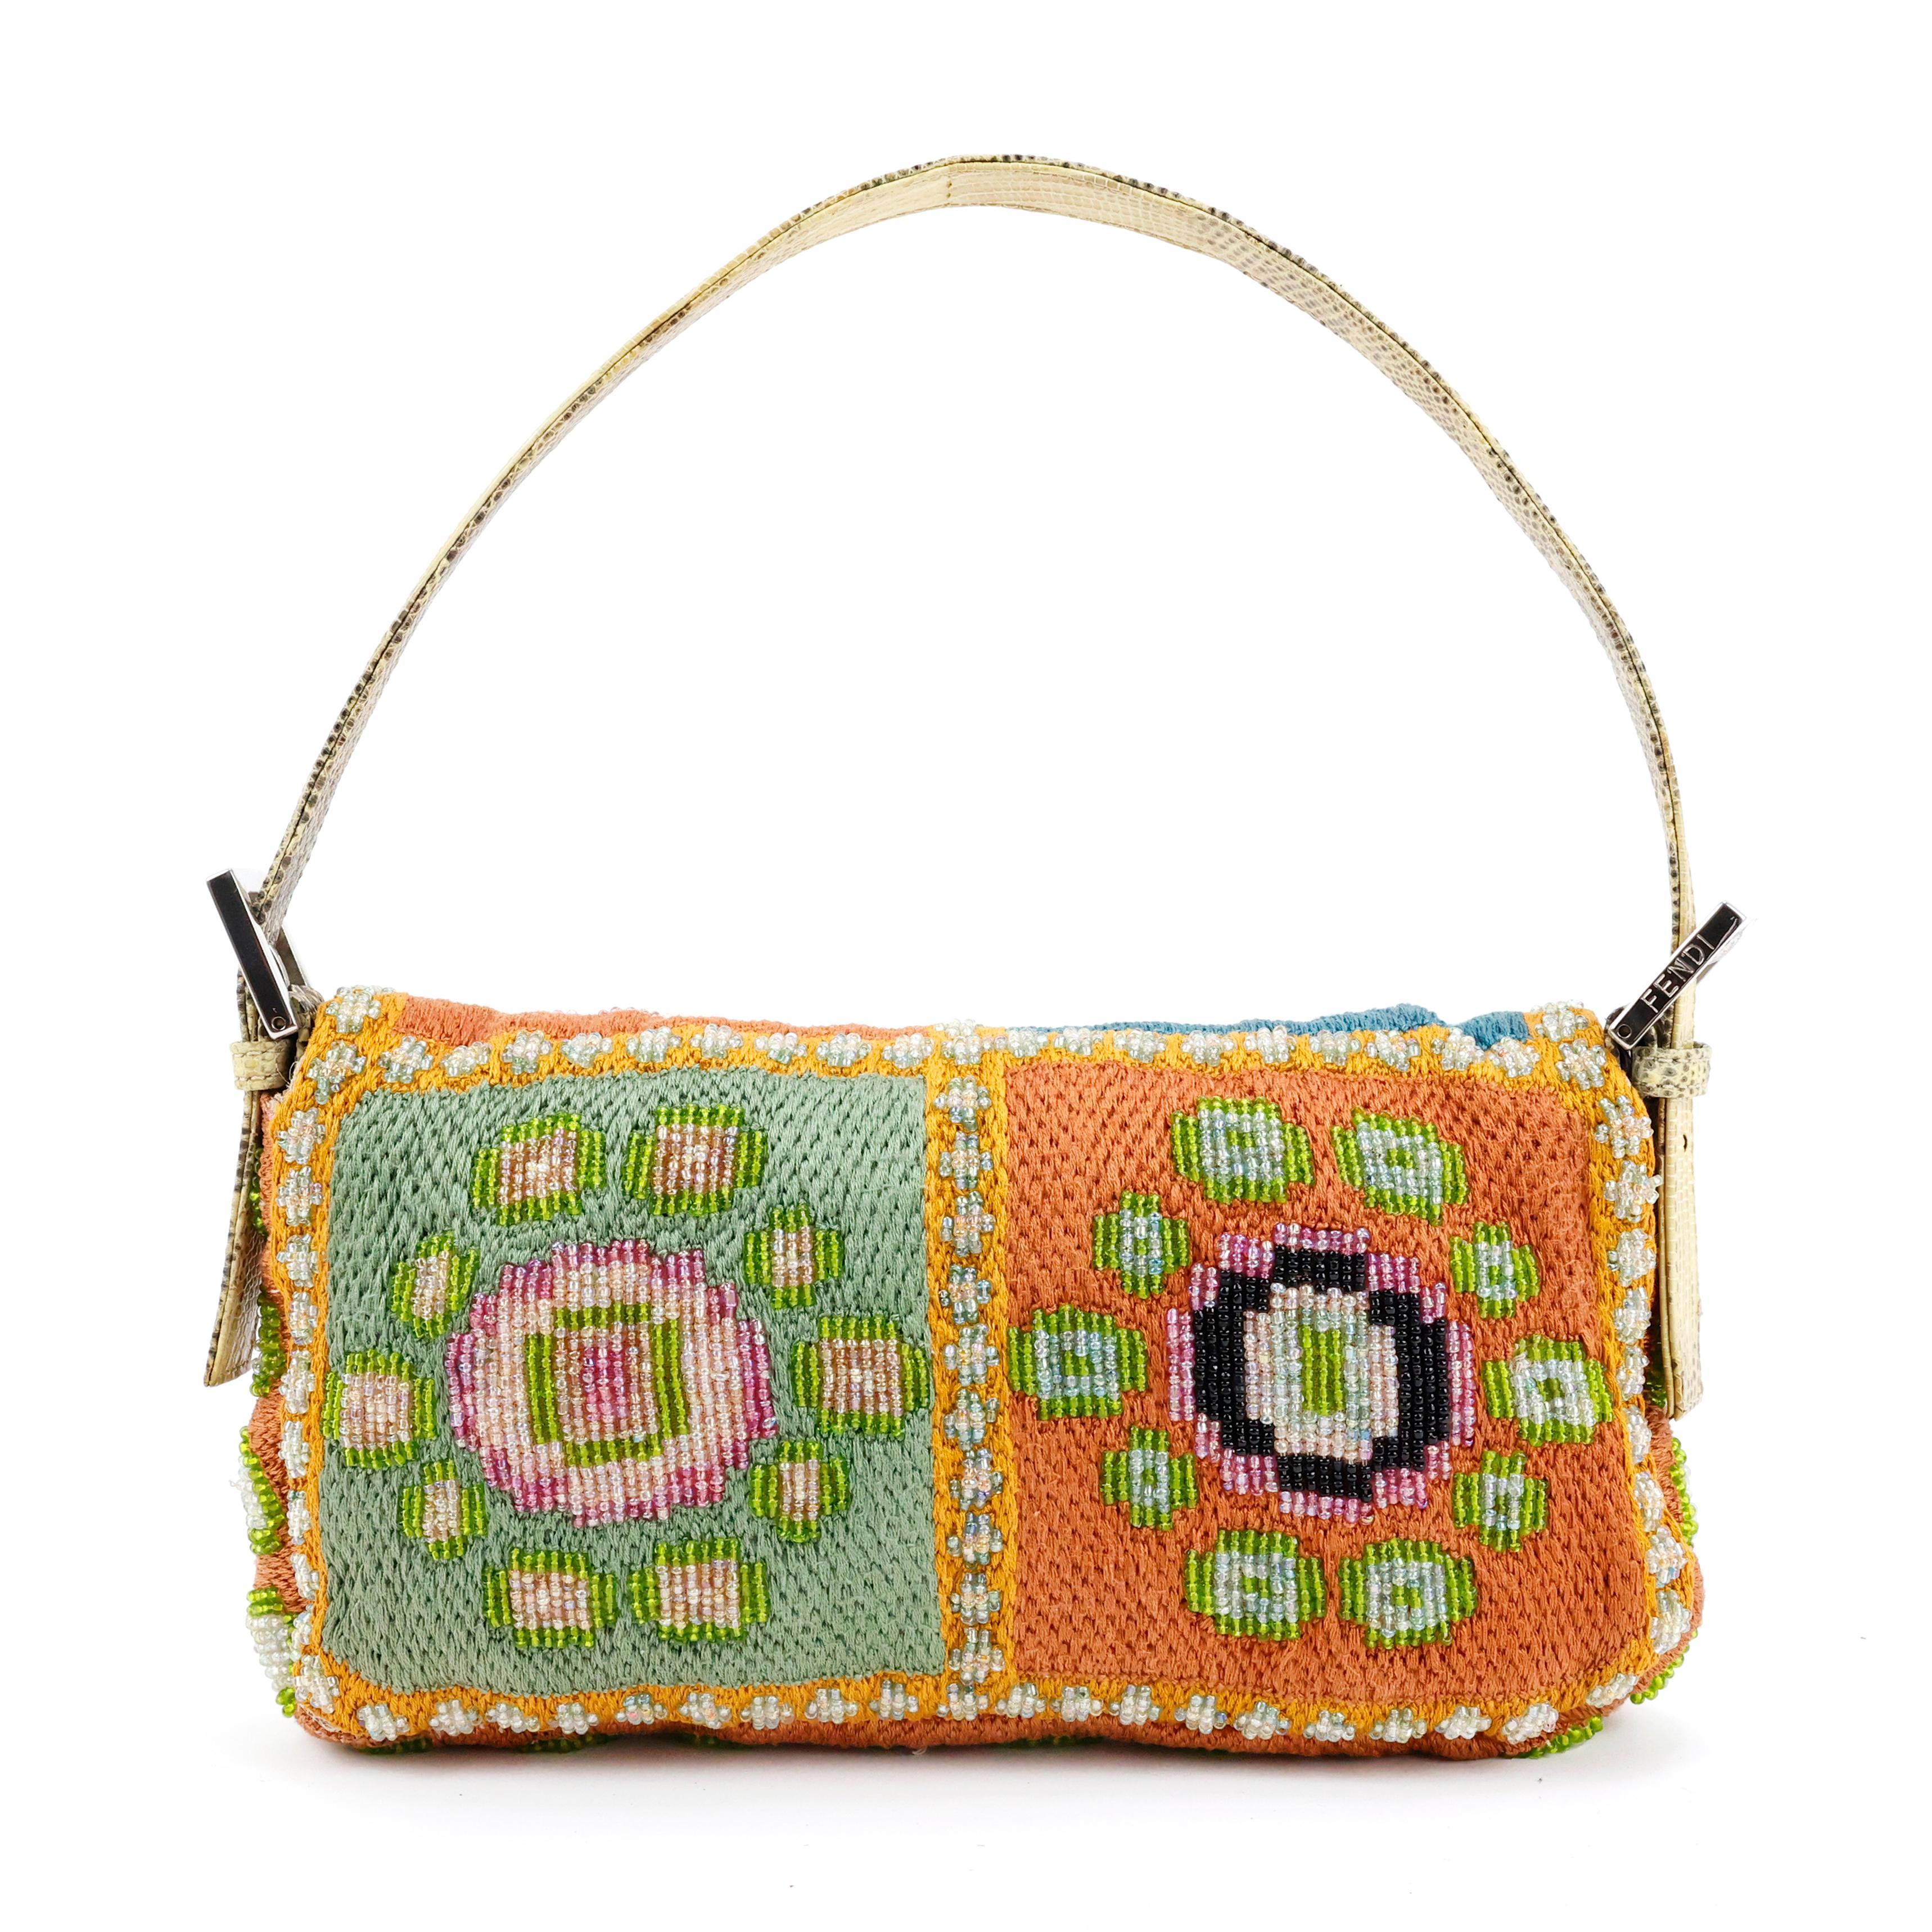 Fendi multicolor baguette bag all over crafted of embroidery and beads in many colors, with exotic (Lizard) leather. Silk satin interior color fucsia featuring one zippered pocket. 

Condition:
Really good. To note: slight discoloration on internal